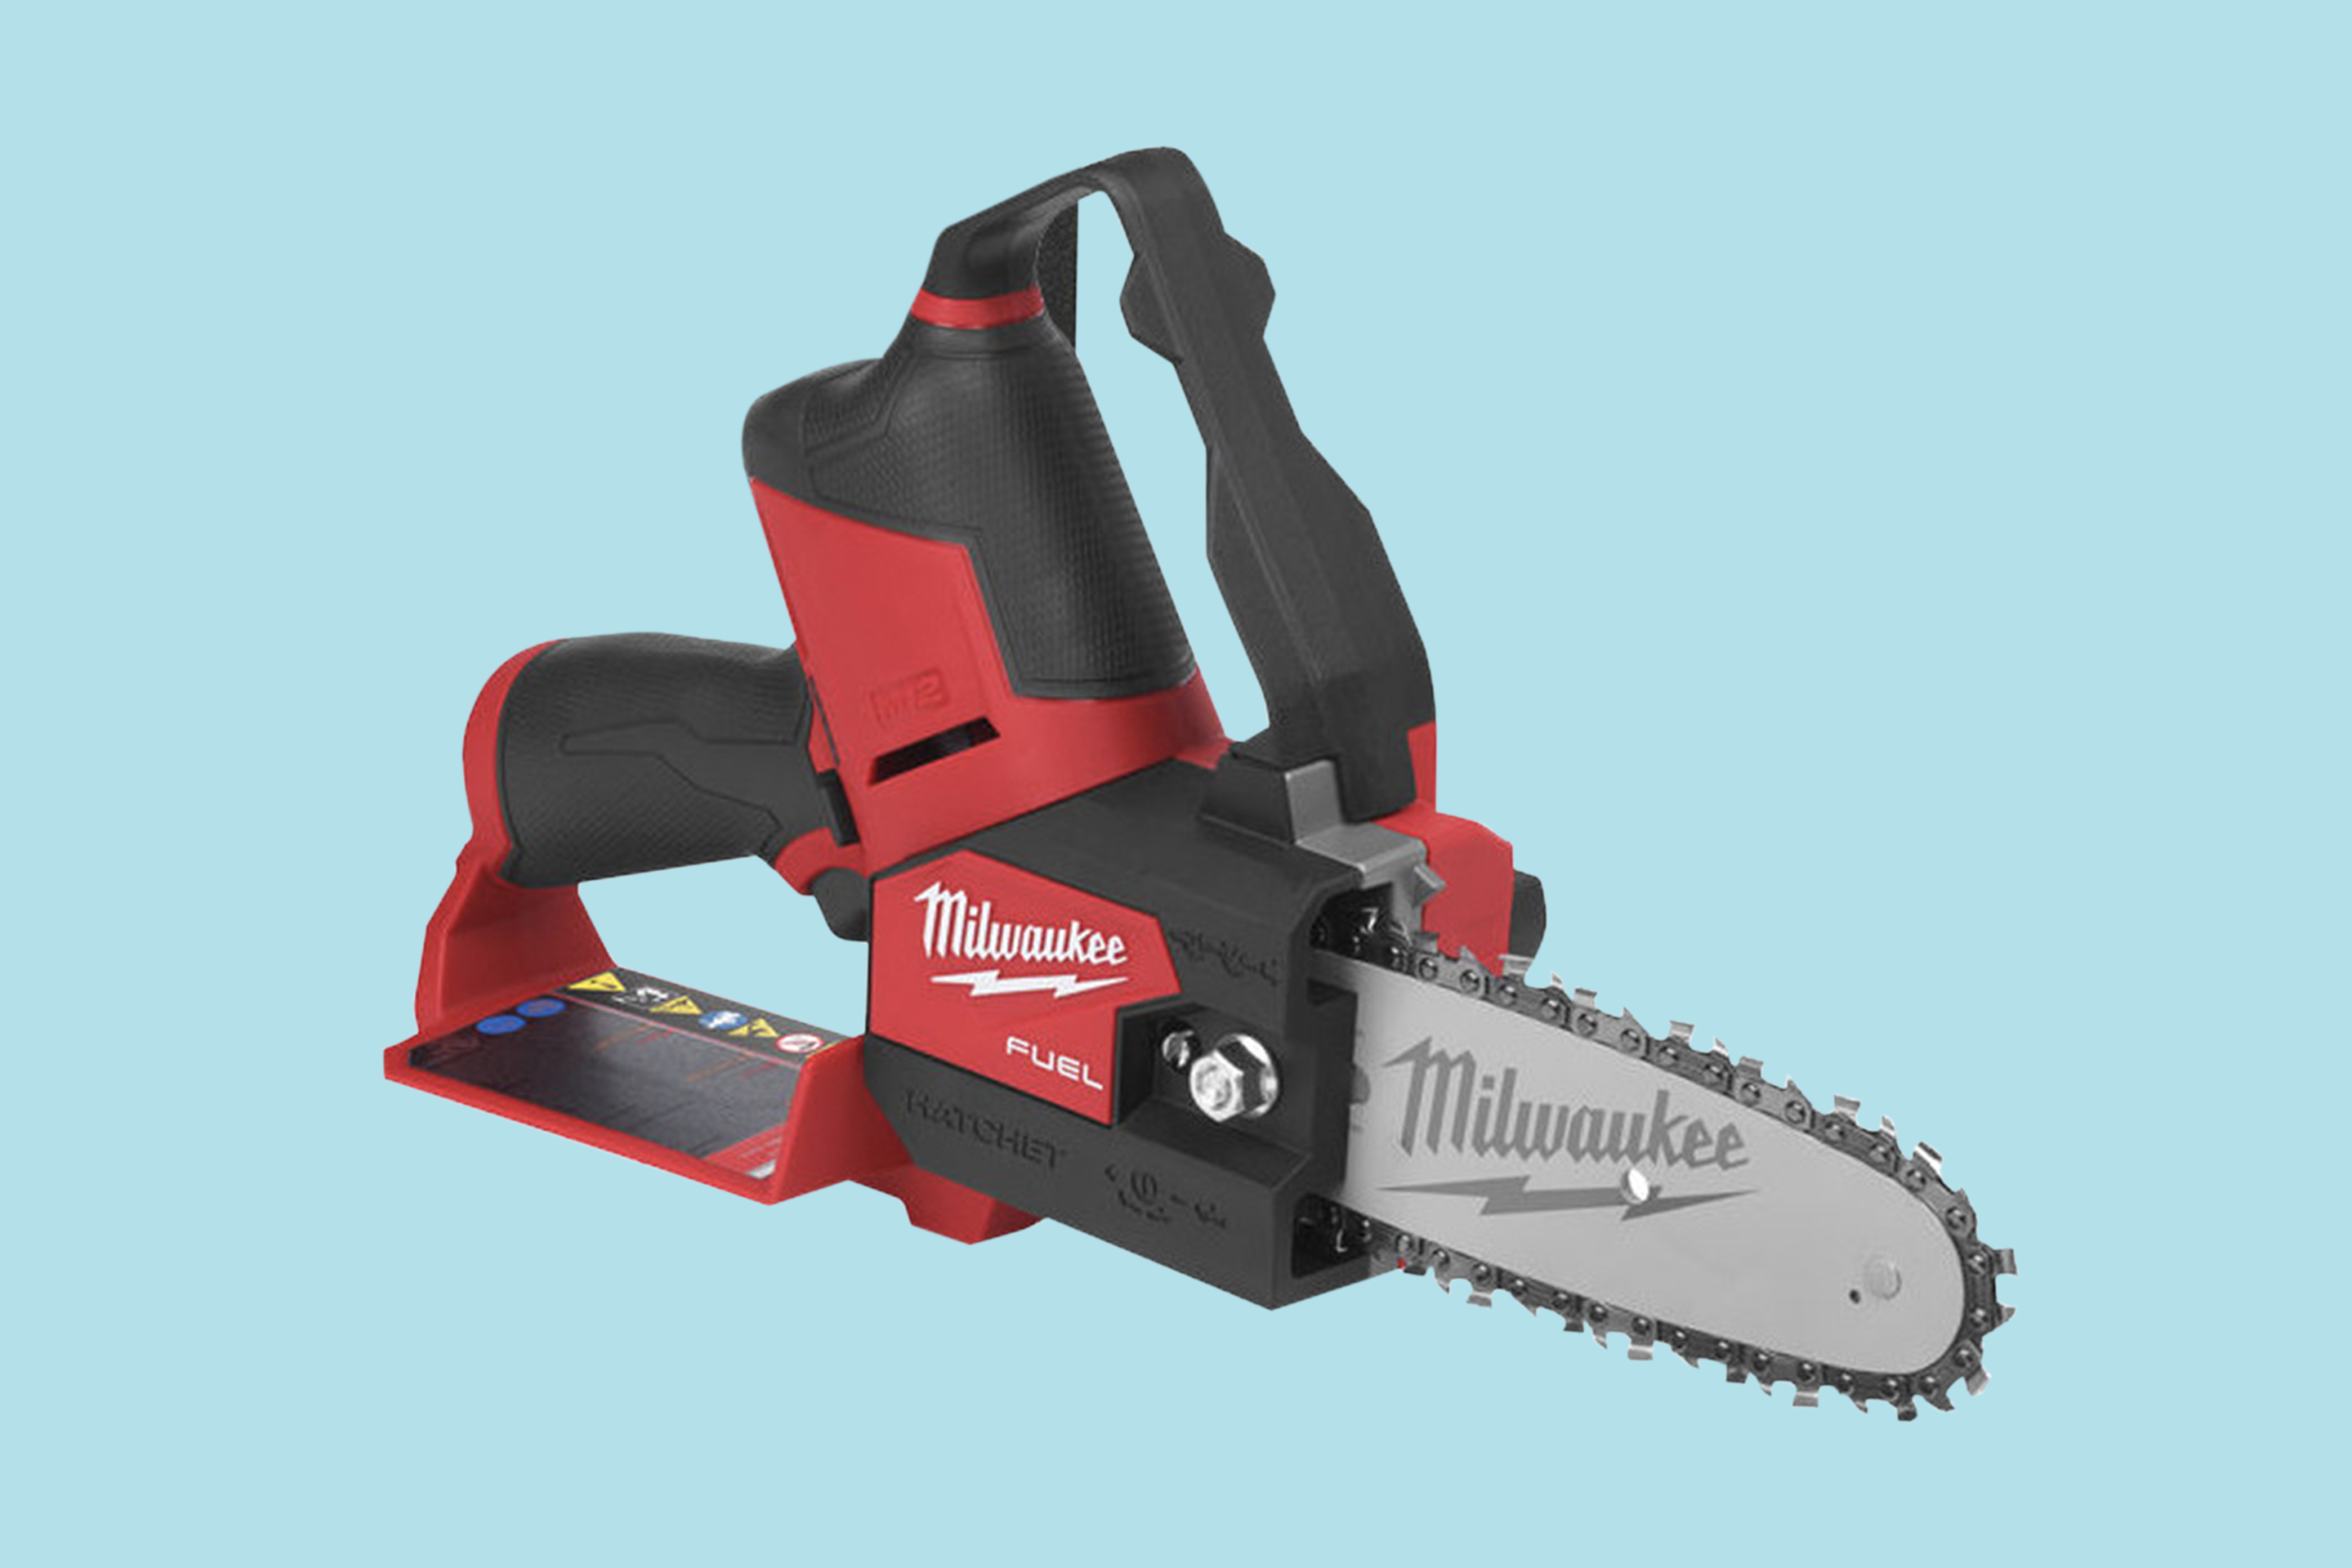 Best Mini Chainsaws For 2021 By Money Money